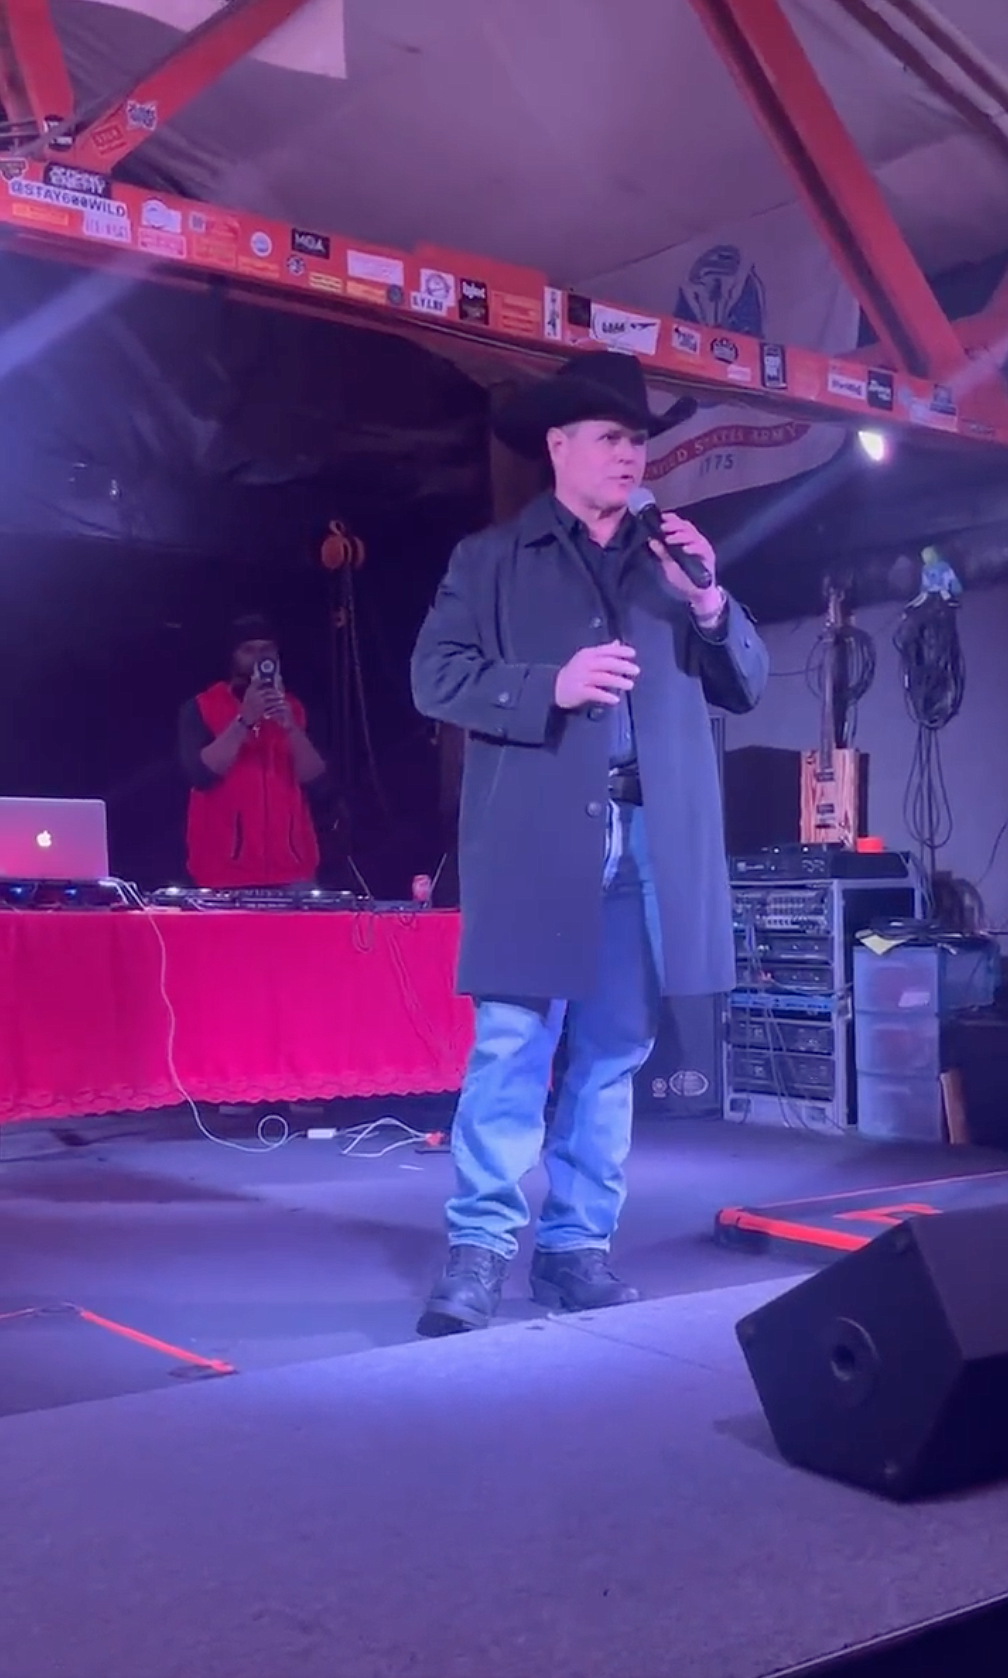 A video showing Kootenai County Sheriff Bob Norris at a political event in April has circulated online.